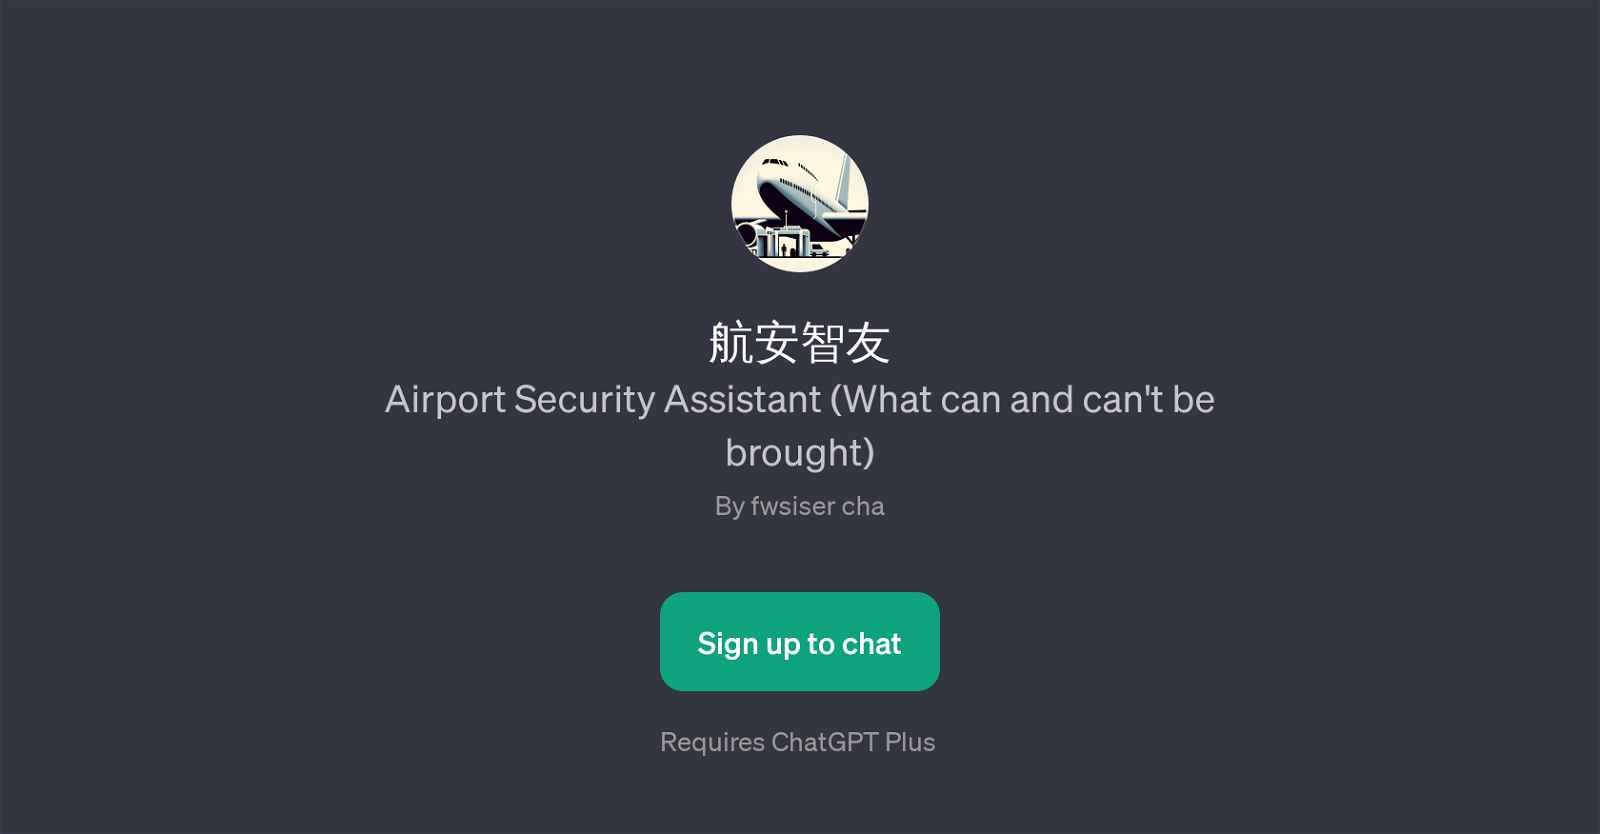 Airport Security Assistant website